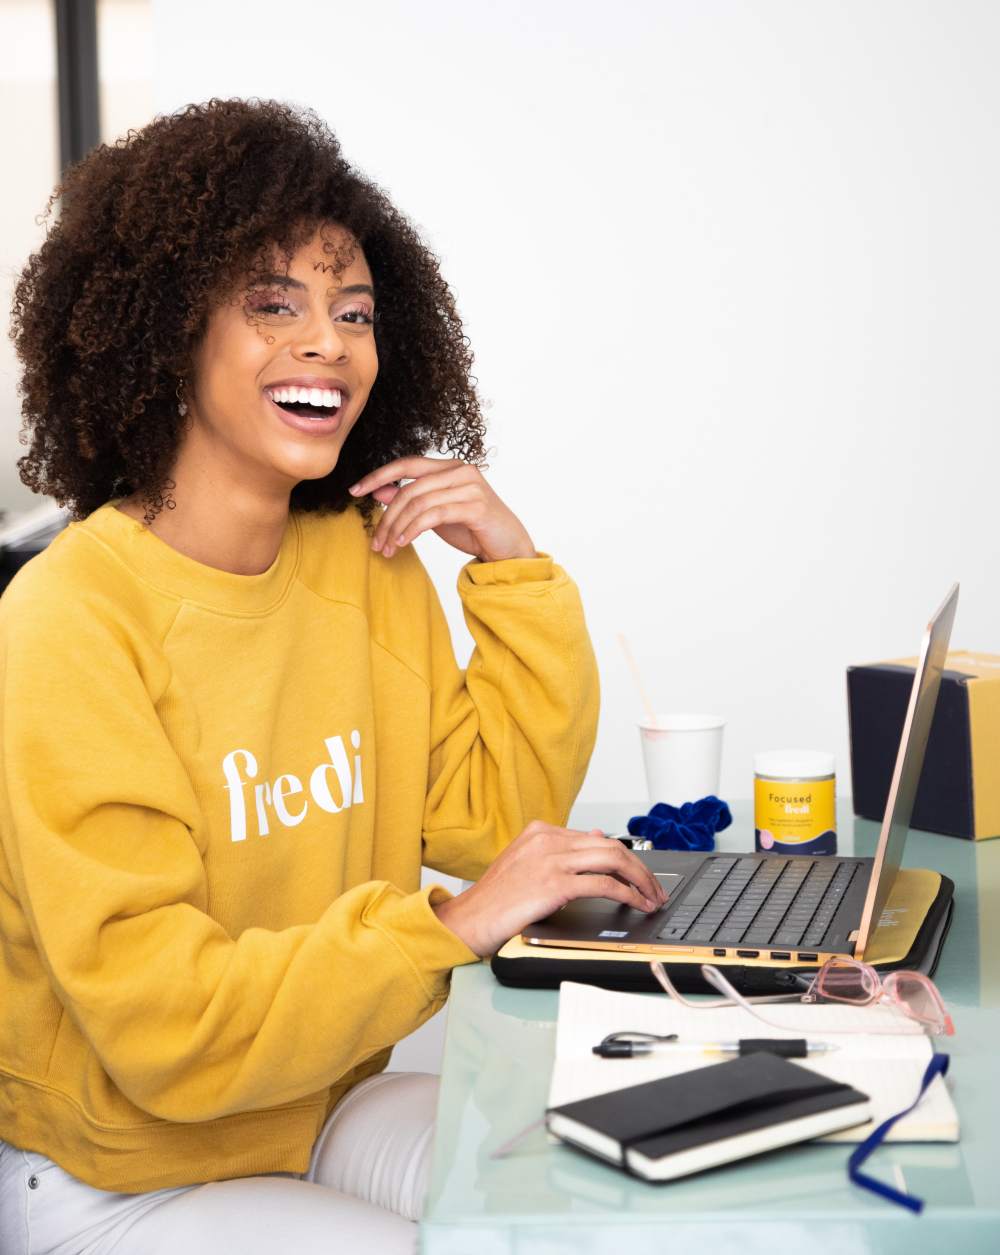 team-fredi-Giofbyn4TTE-unsplash-online-classes-woman-black-mixed-curly-hair-courses-increase-salary-make-more-money